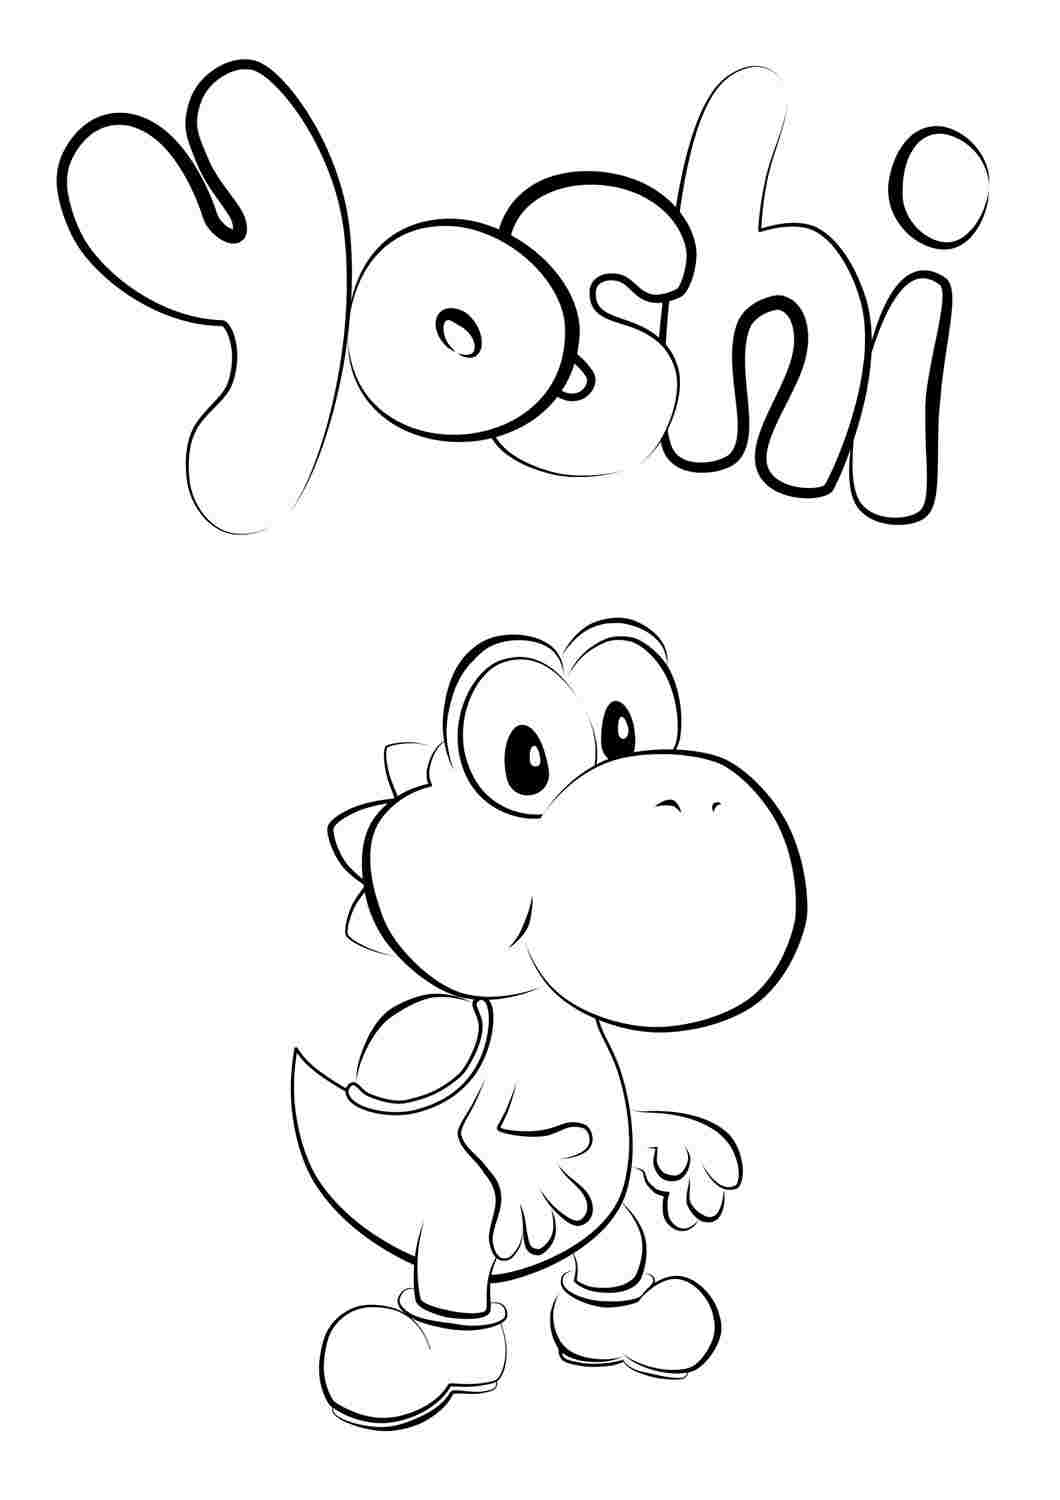 Baby Yoshi from Earth Evolution verion in Super Mario Bros Coloring Pages